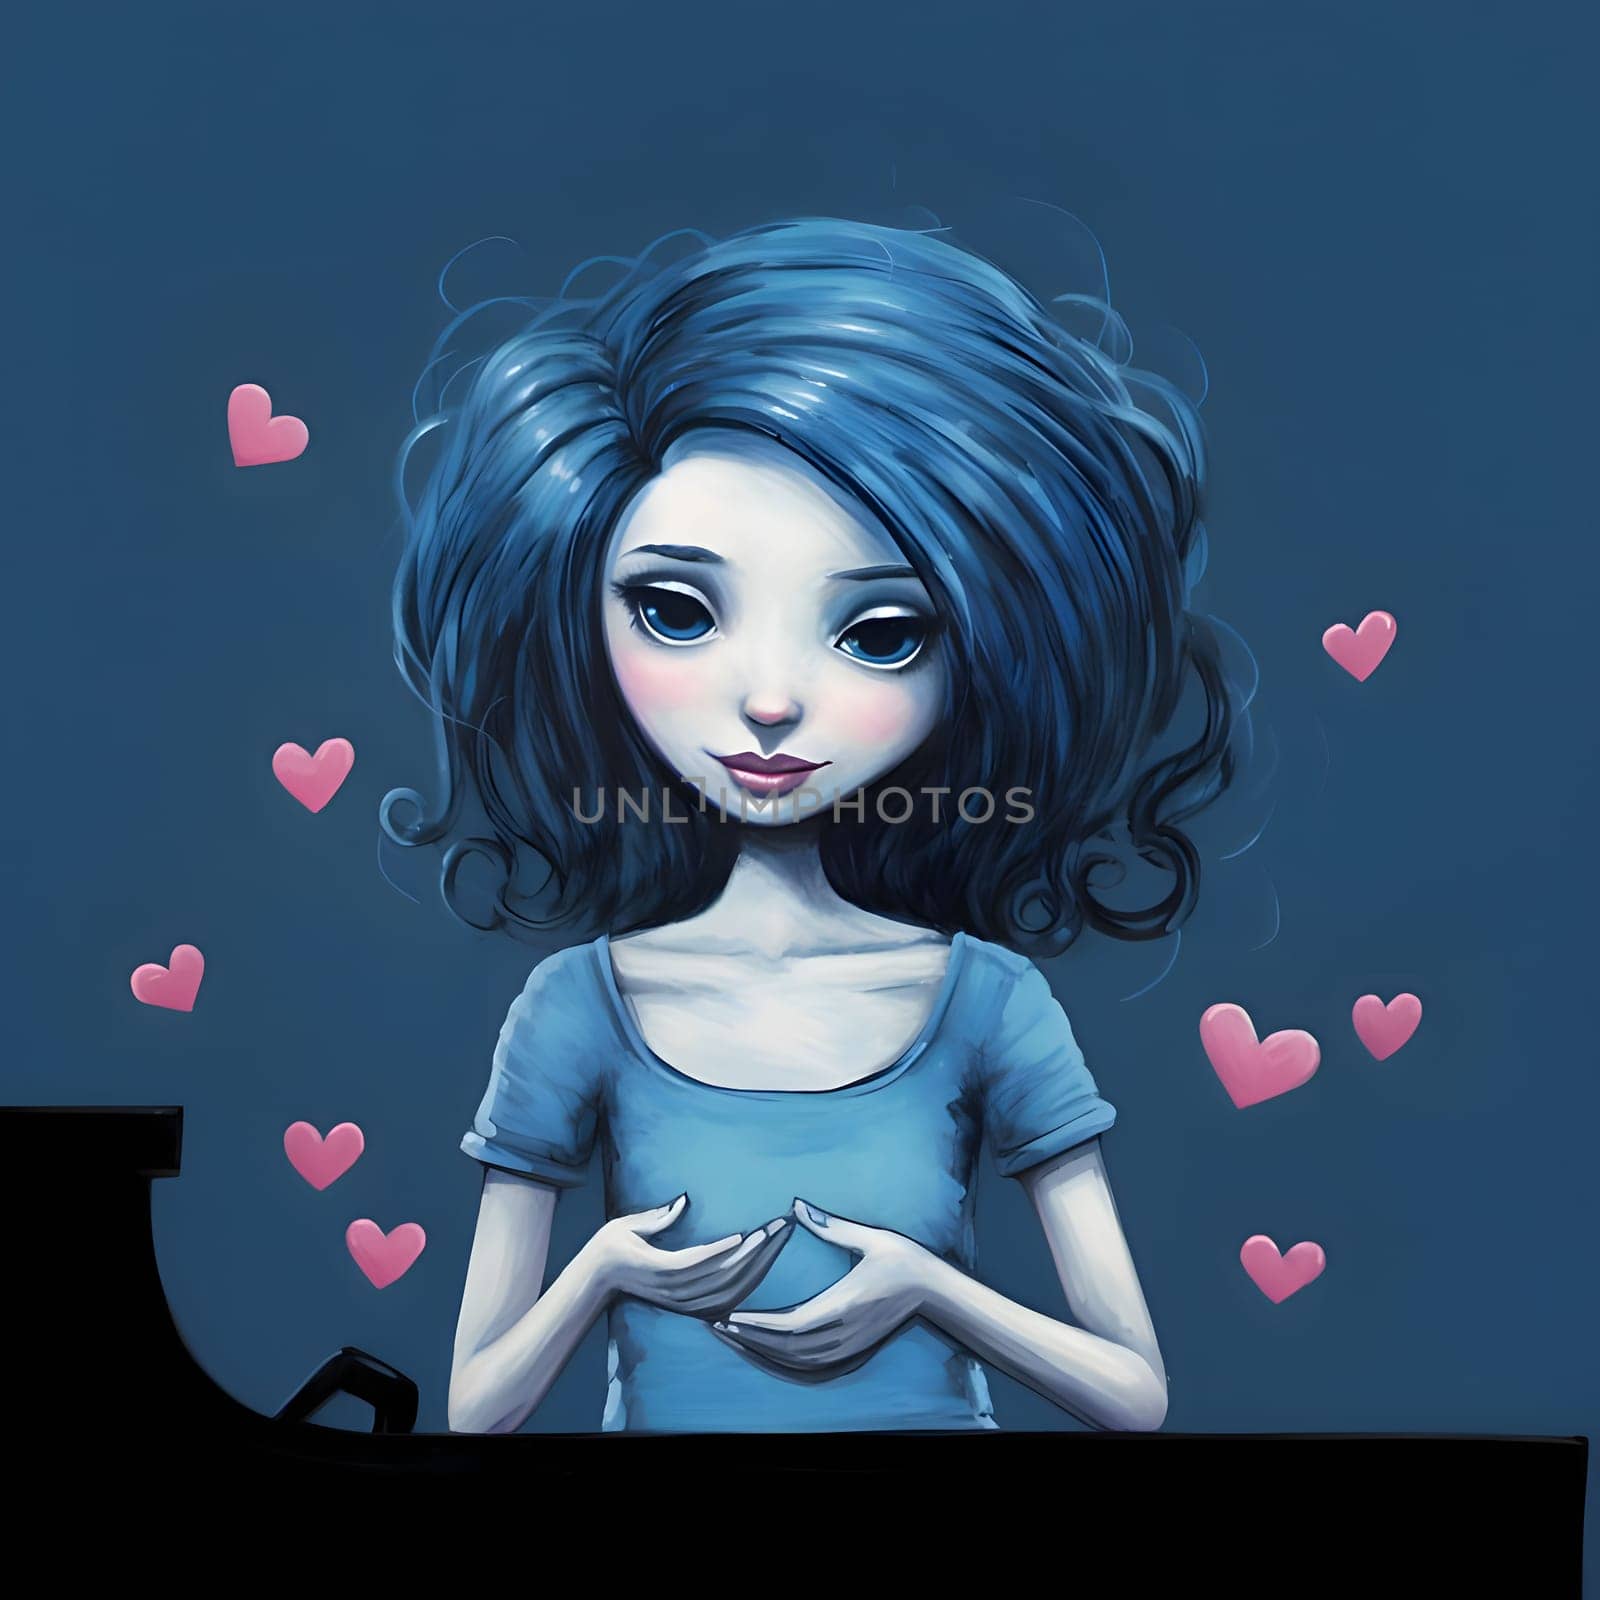 Illustrations of a lonely girl around her tiny hearts, dark background. Heart as a symbol of affection and love. by ThemesS